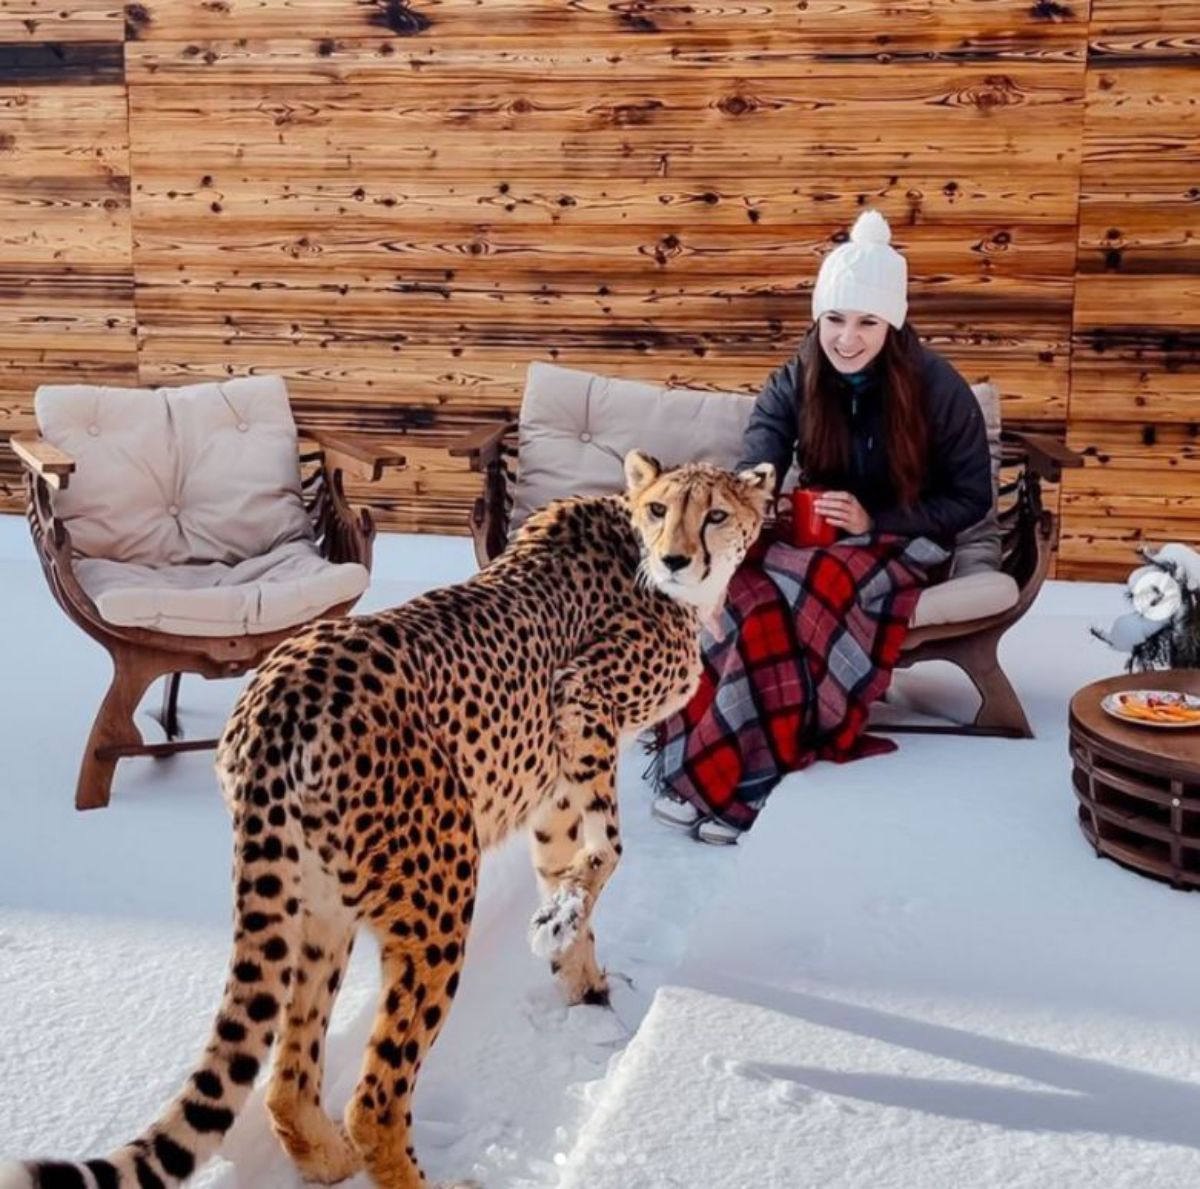 a cheetah stands on snow nex to a woman wearing winter clothes sitting on patio furniture